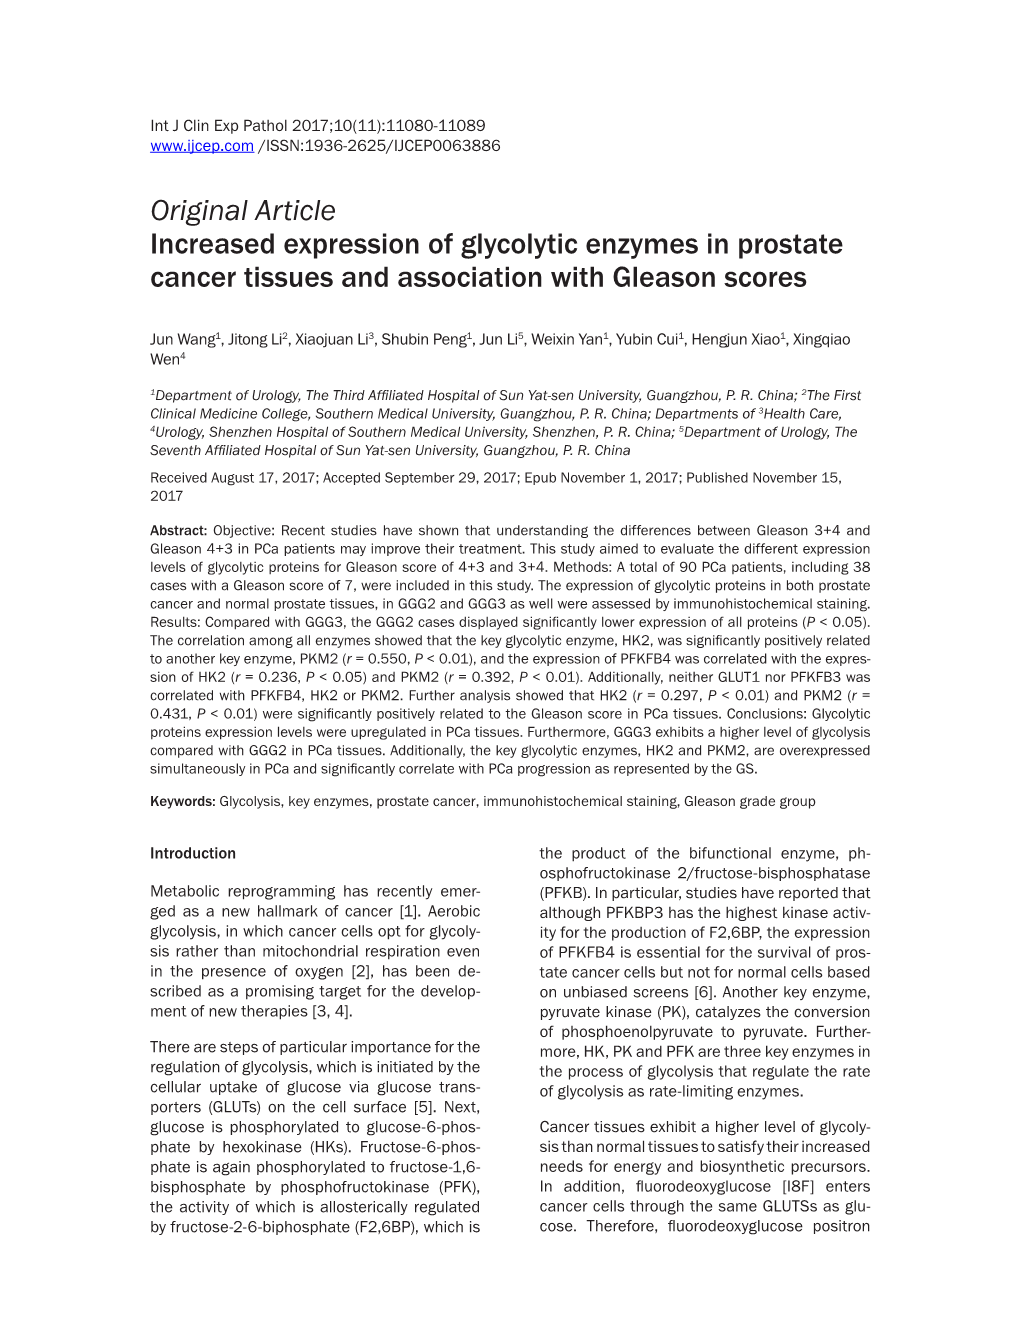 Original Article Increased Expression of Glycolytic Enzymes in Prostate Cancer Tissues and Association with Gleason Scores